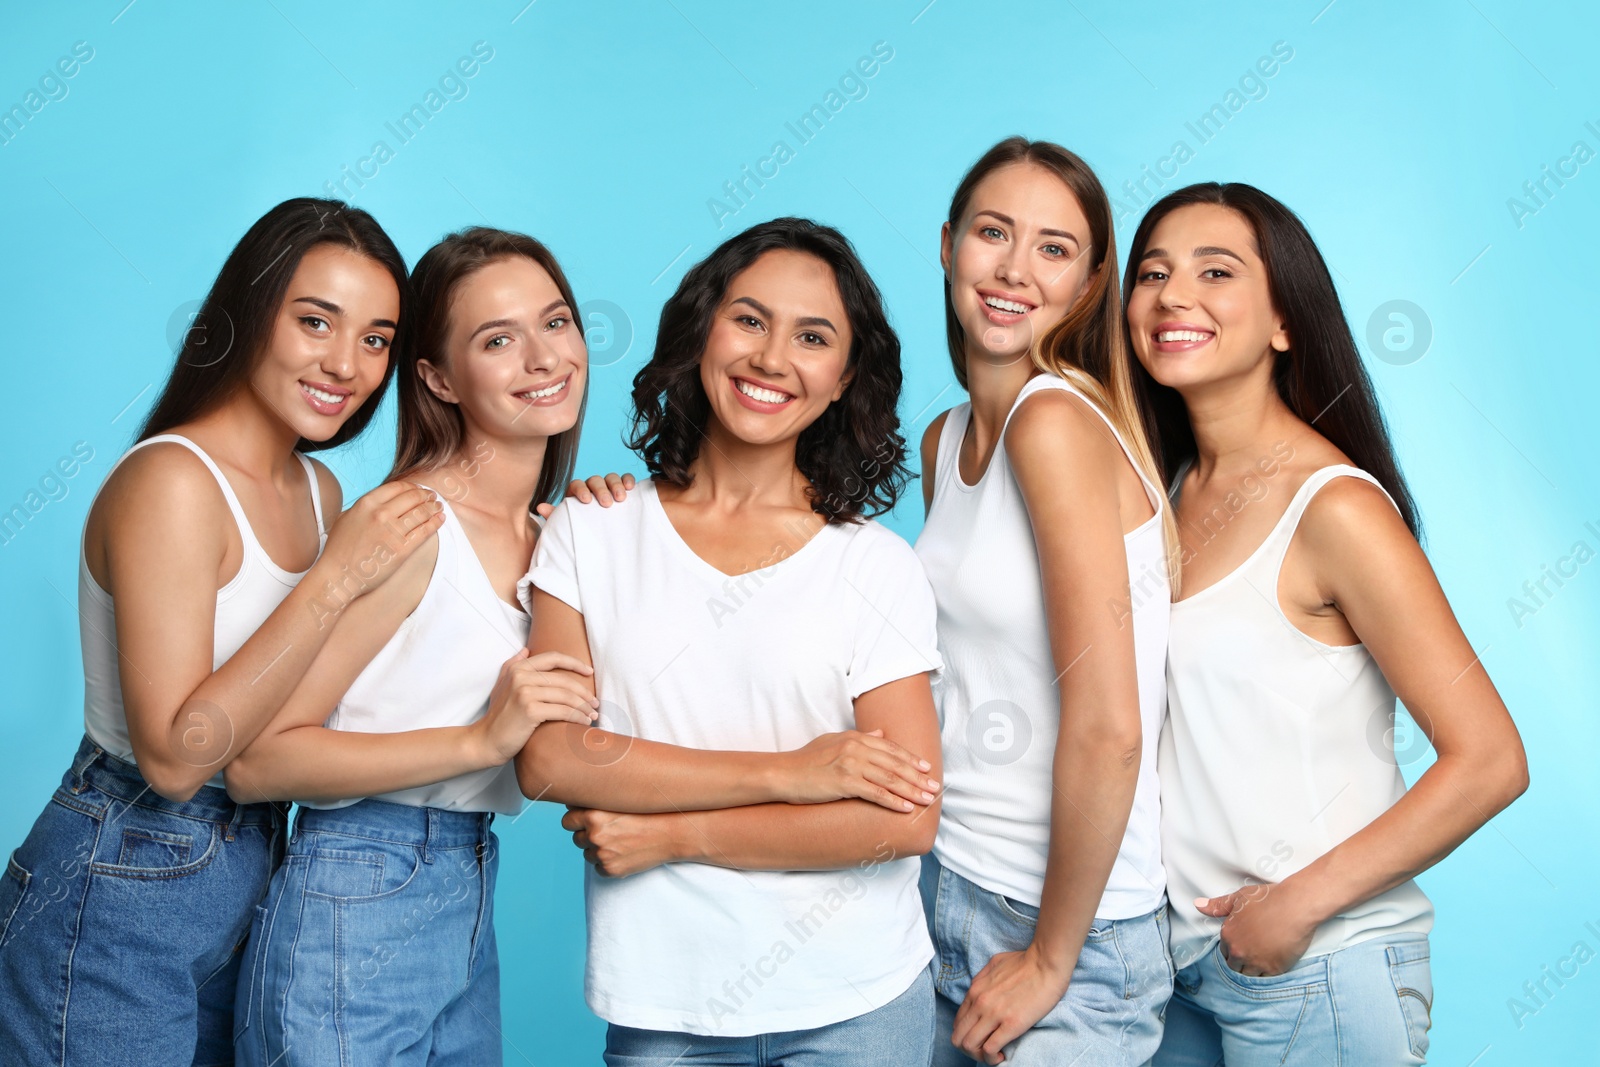 Photo of Happy women on light blue background. Girl power concept